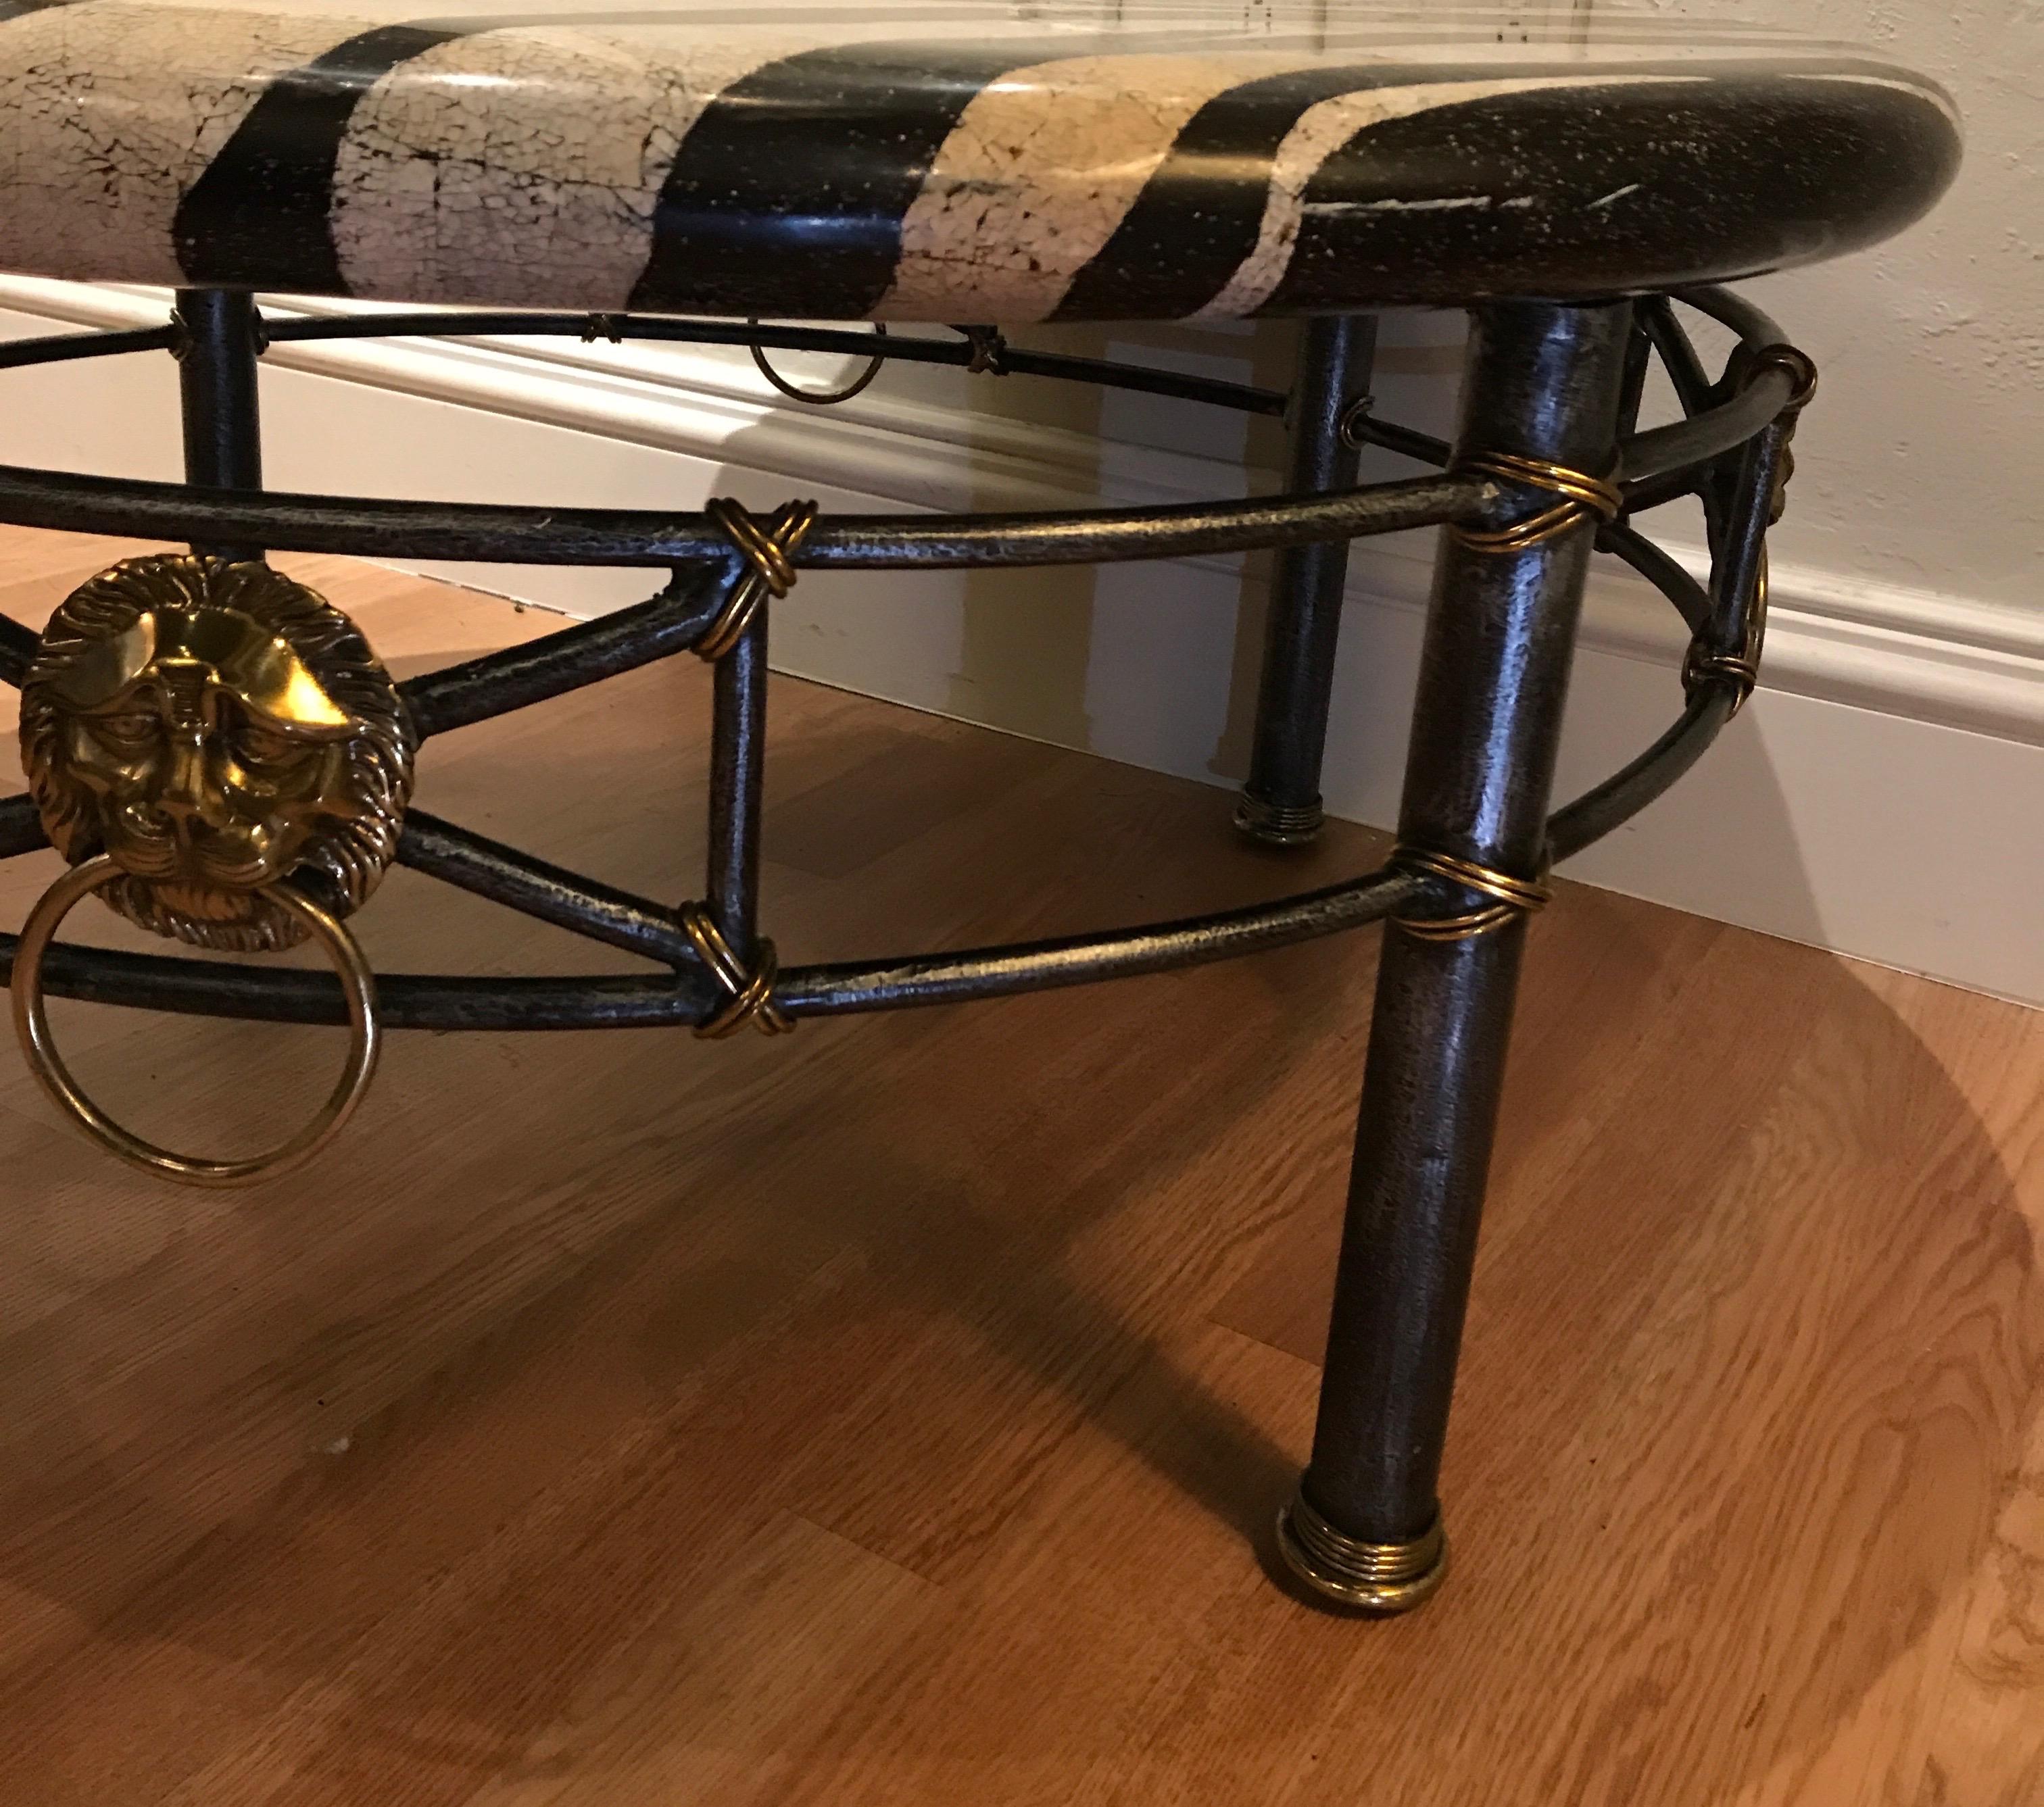 Midcentury coffee table with iron and brass base. Top is a zebra pattern
composite stone and sides are adorned with large lion heads with rings.